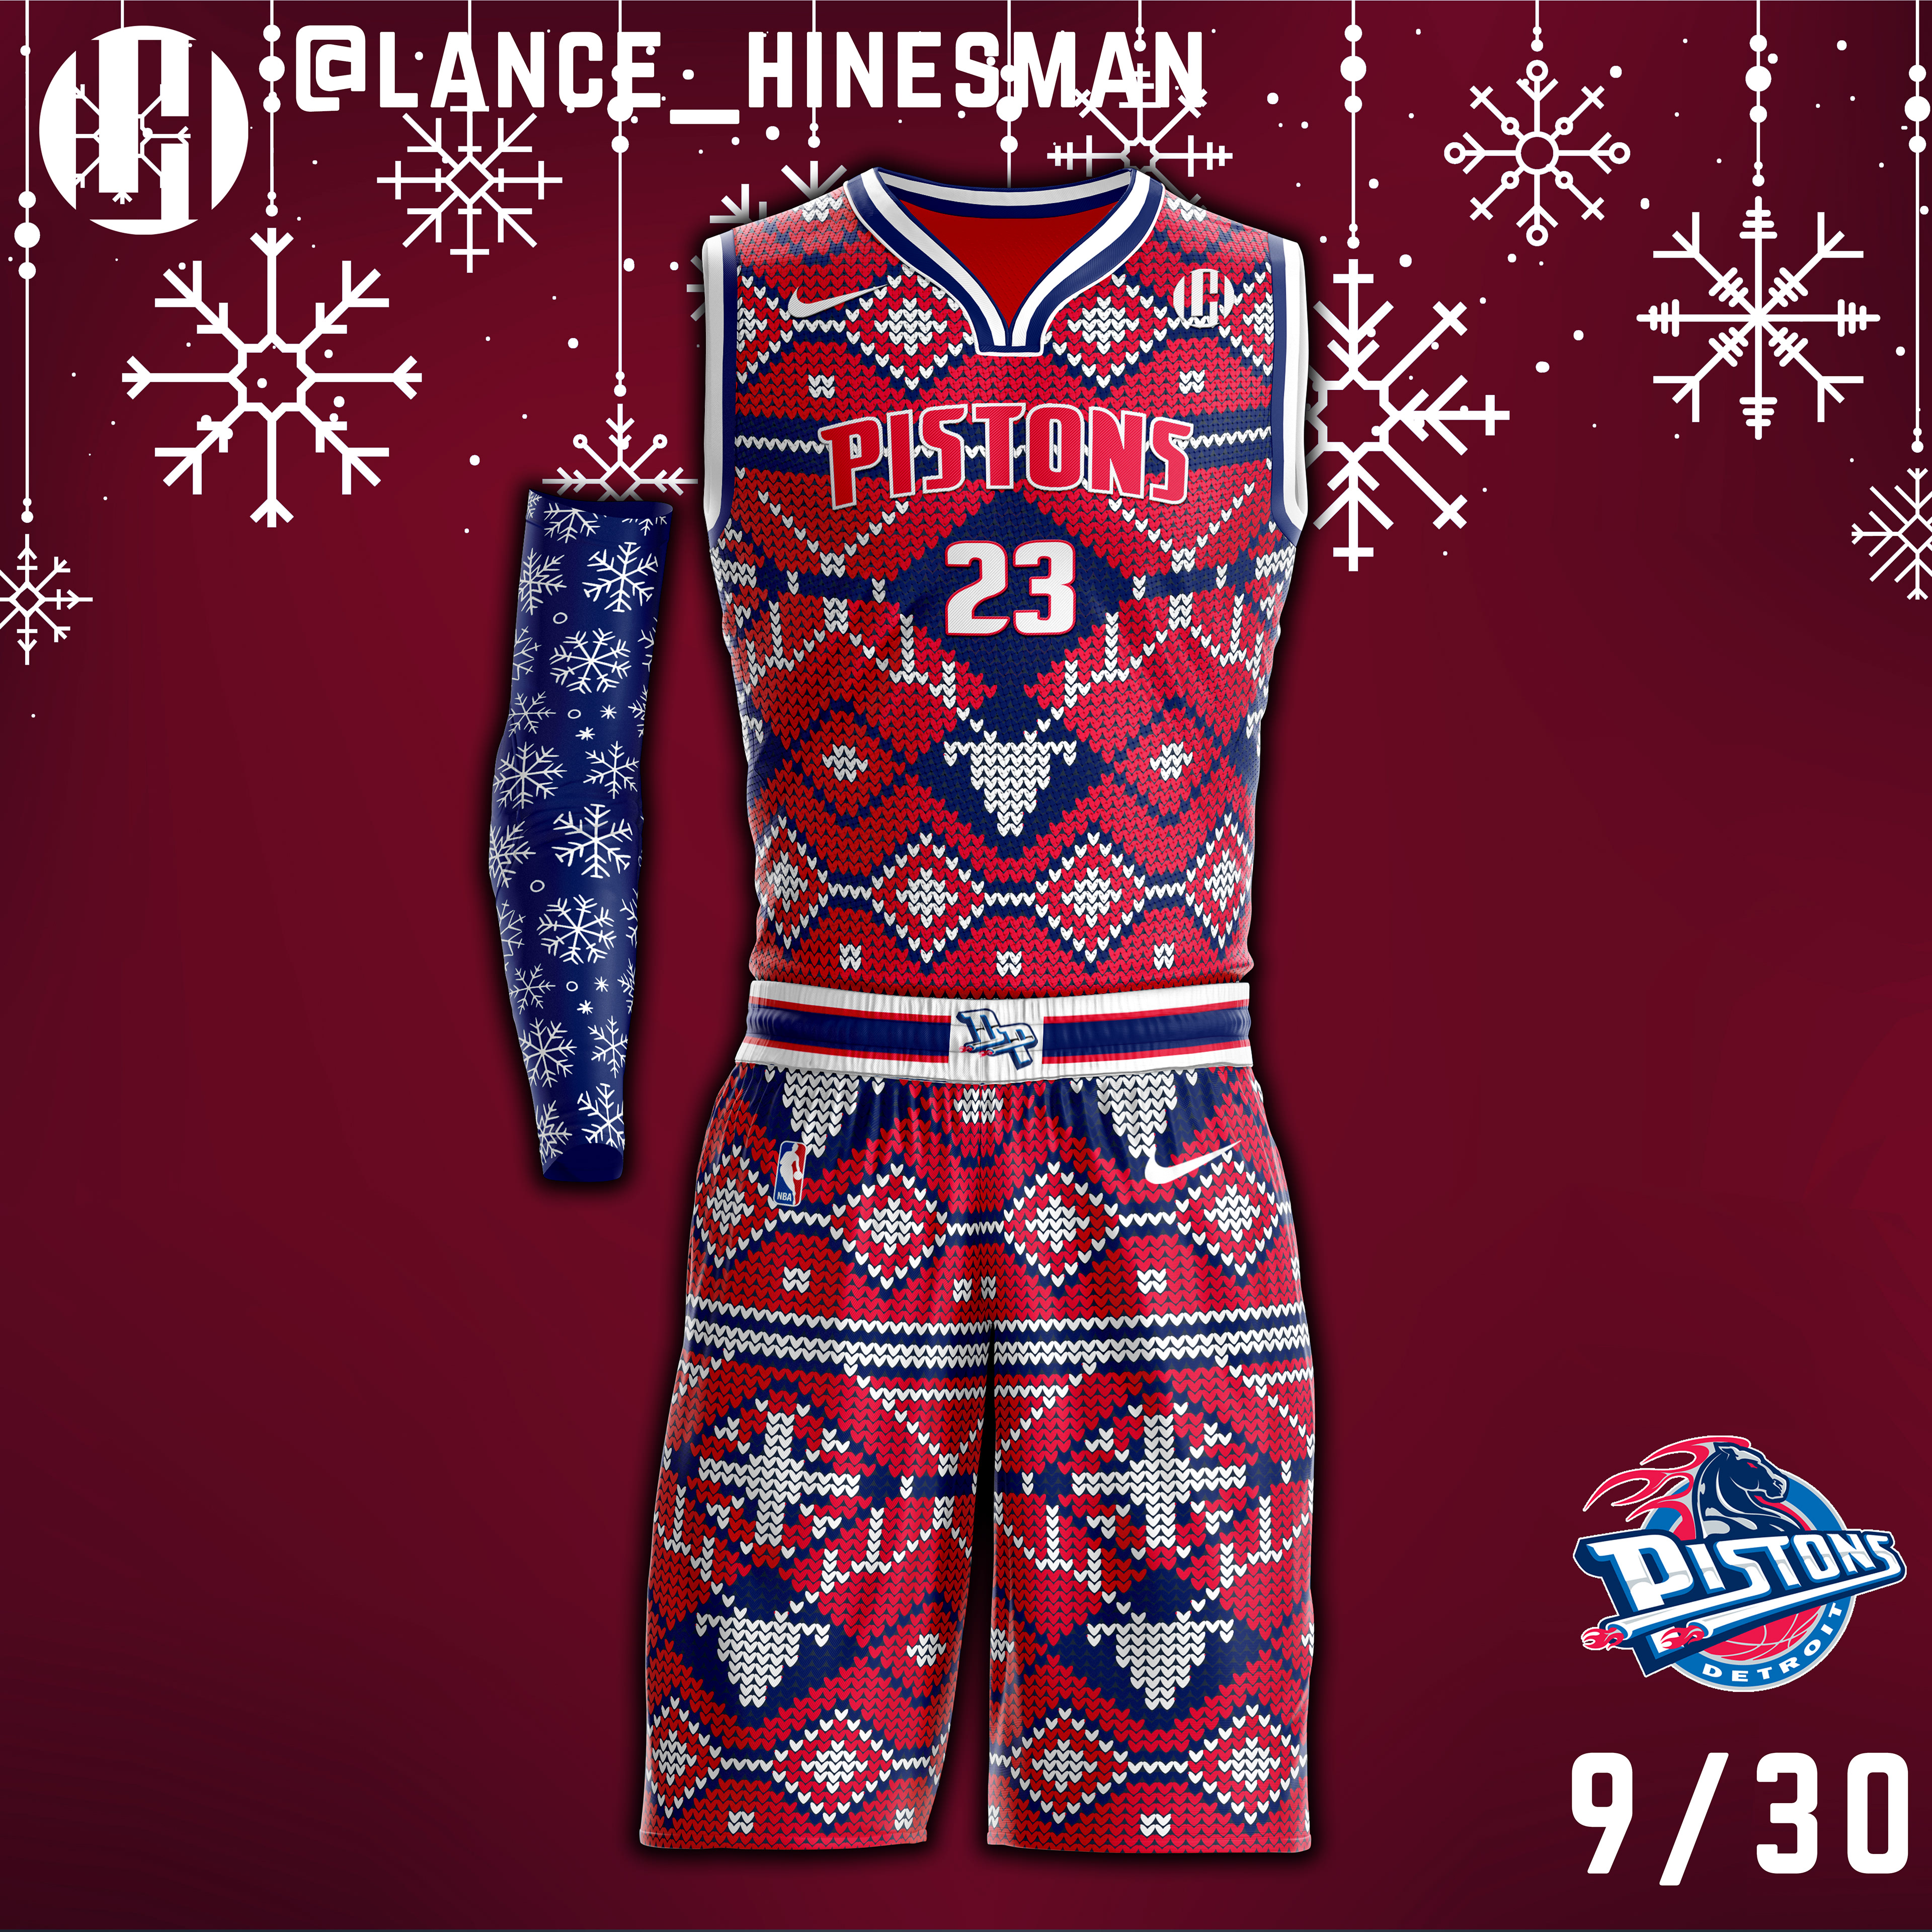 SRELIX - @laclippers x @nuggets Christmas Jersey Concepts